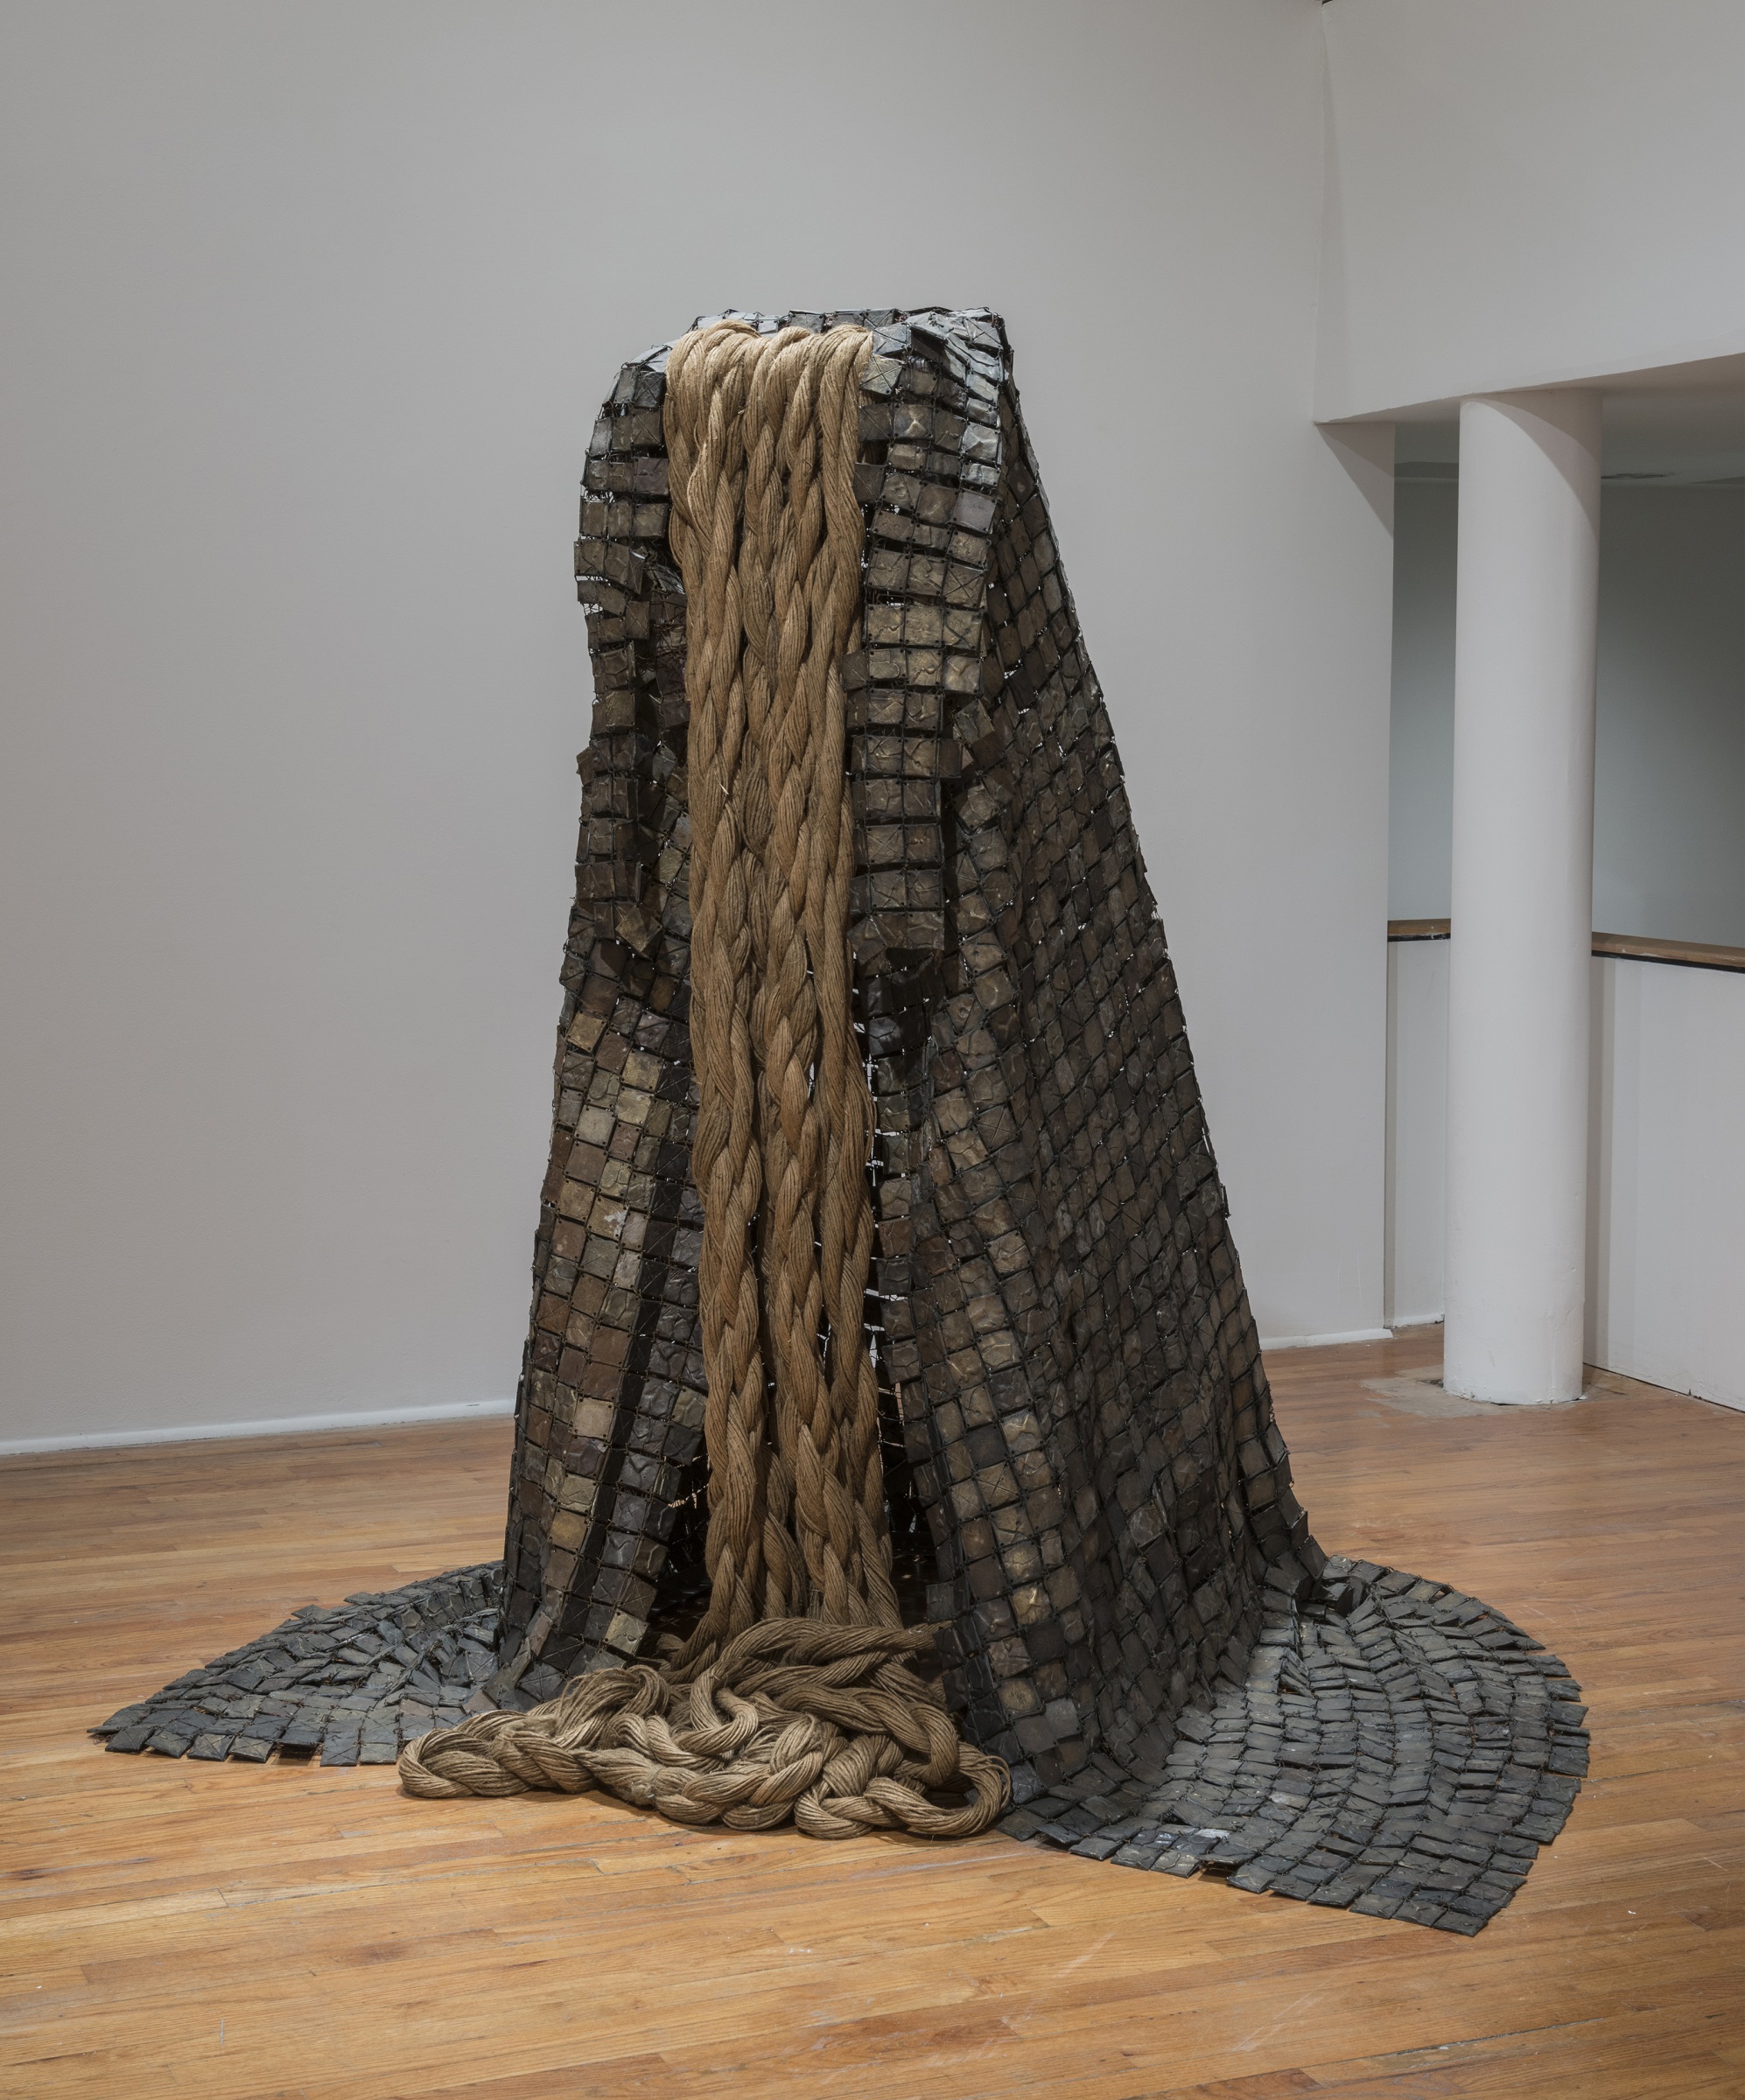 A tall sculpture made of black squares assembled together like scales, sweeping upward like a peak, with lengths of thick rope spilling over the edge like a waterfall